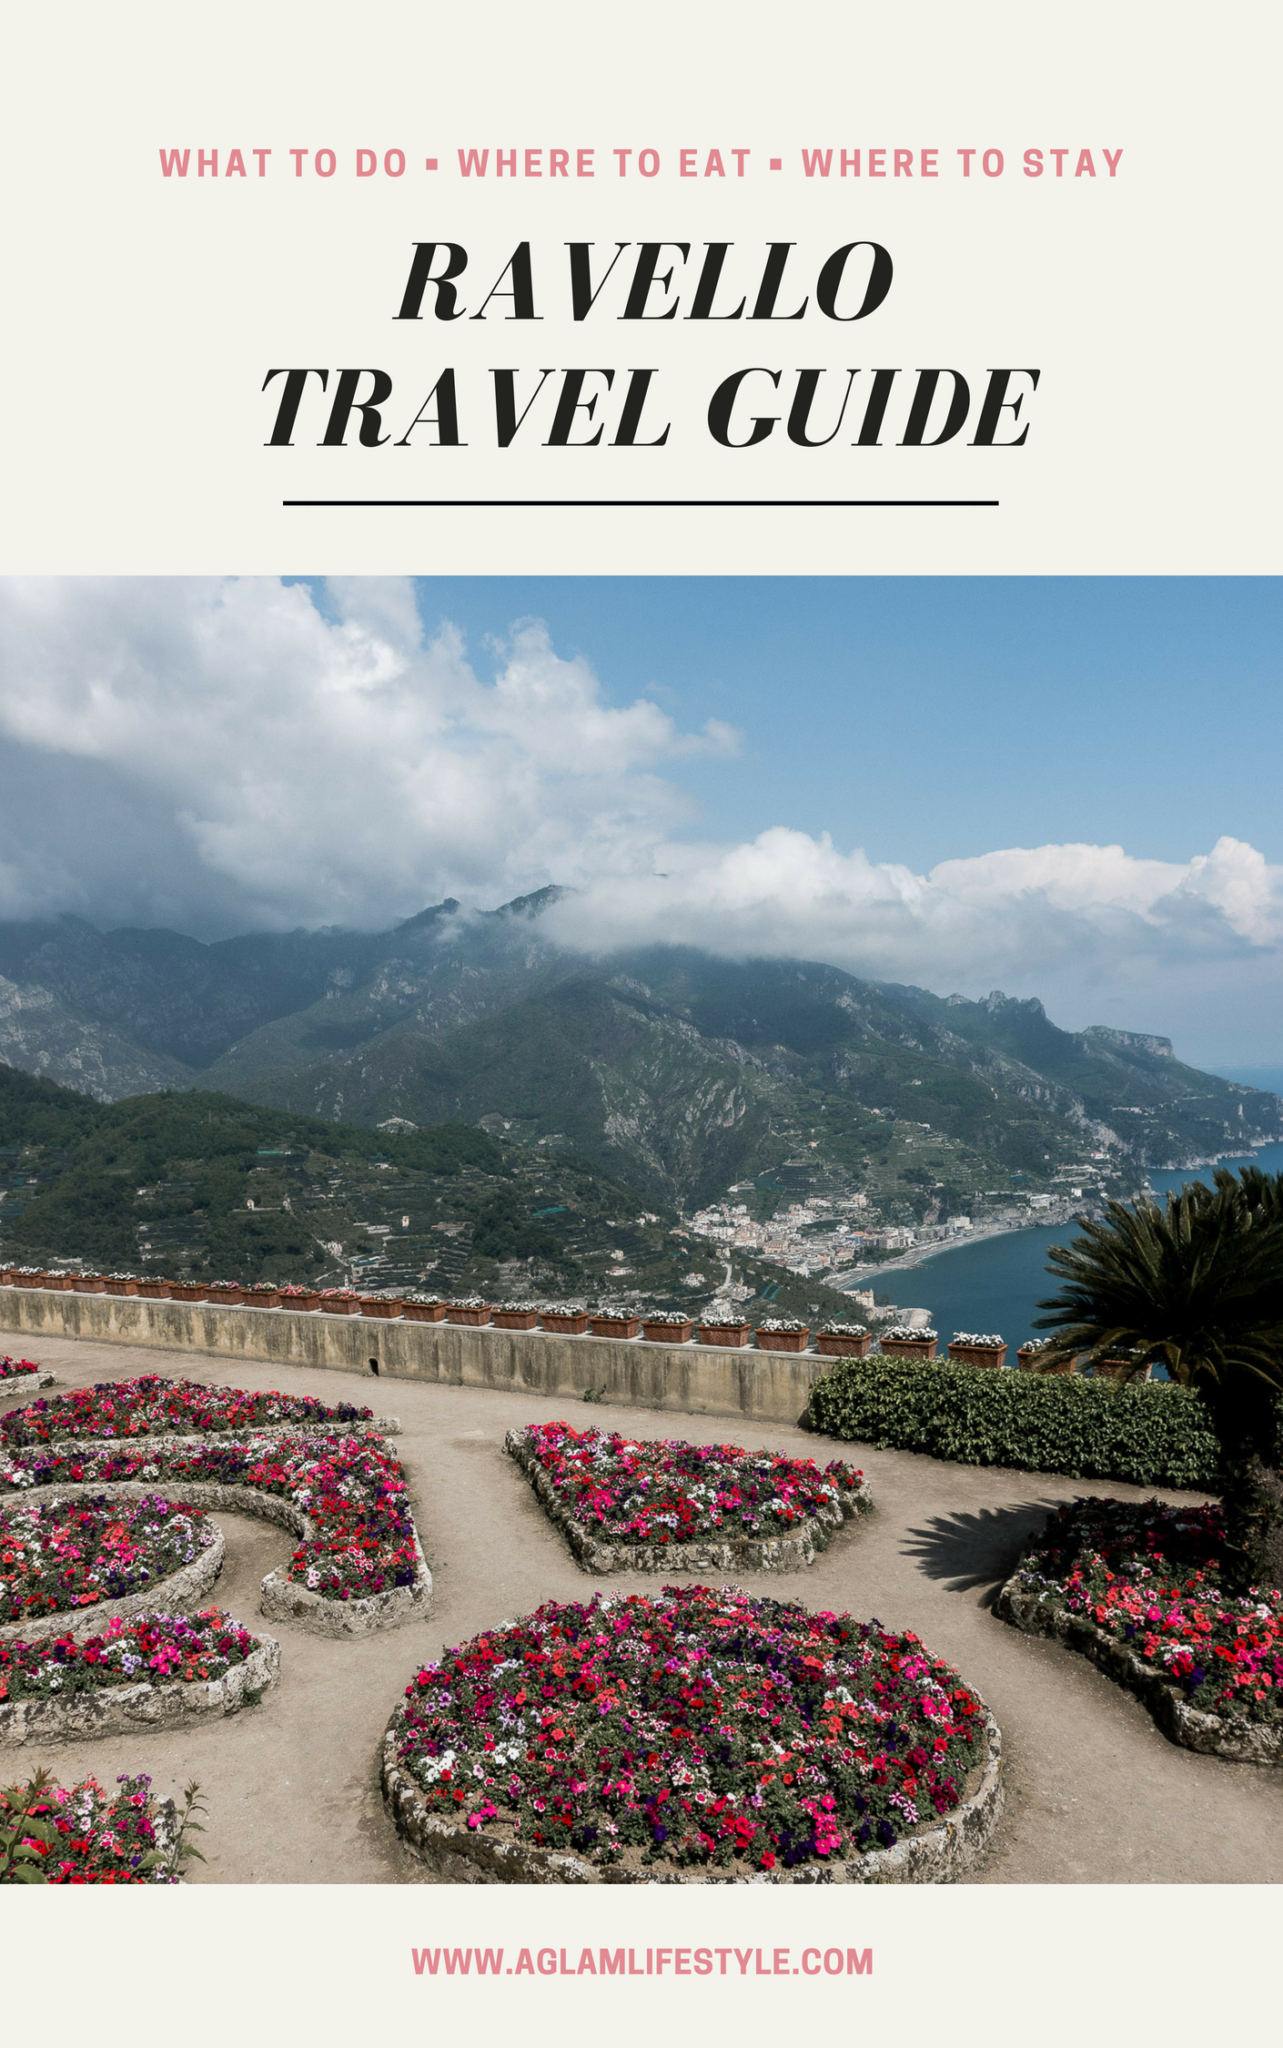 Ravello Travel Guide: The Best Things to Do, Places to Eat, Where to Stay